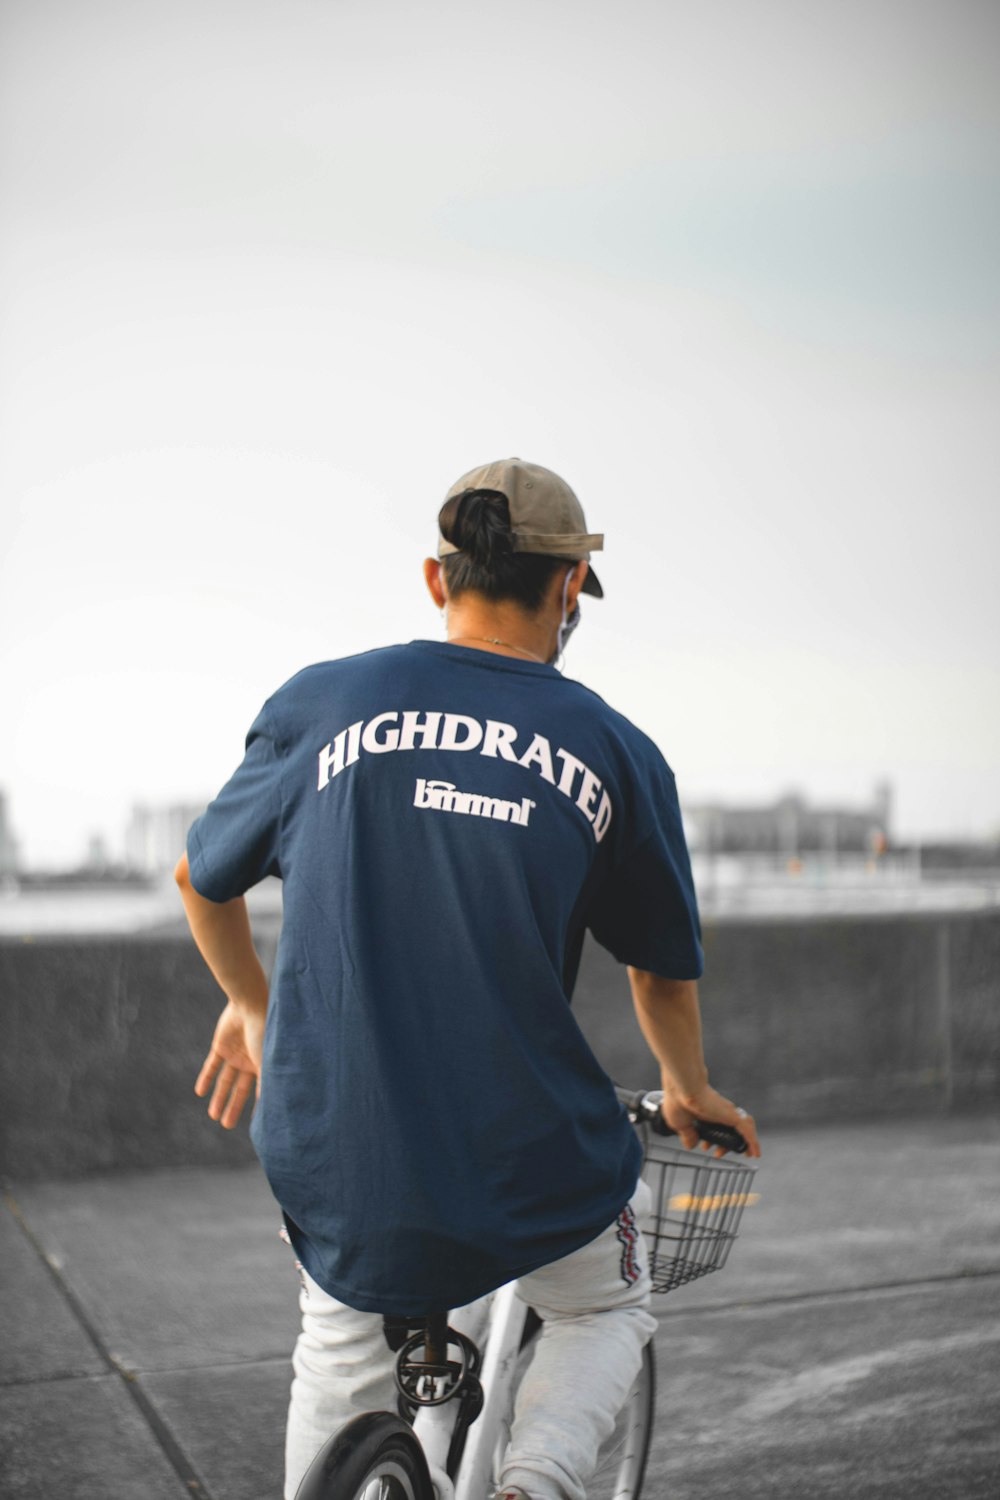 man in blue crew neck t-shirt and black cap standing on gray concrete pavement during